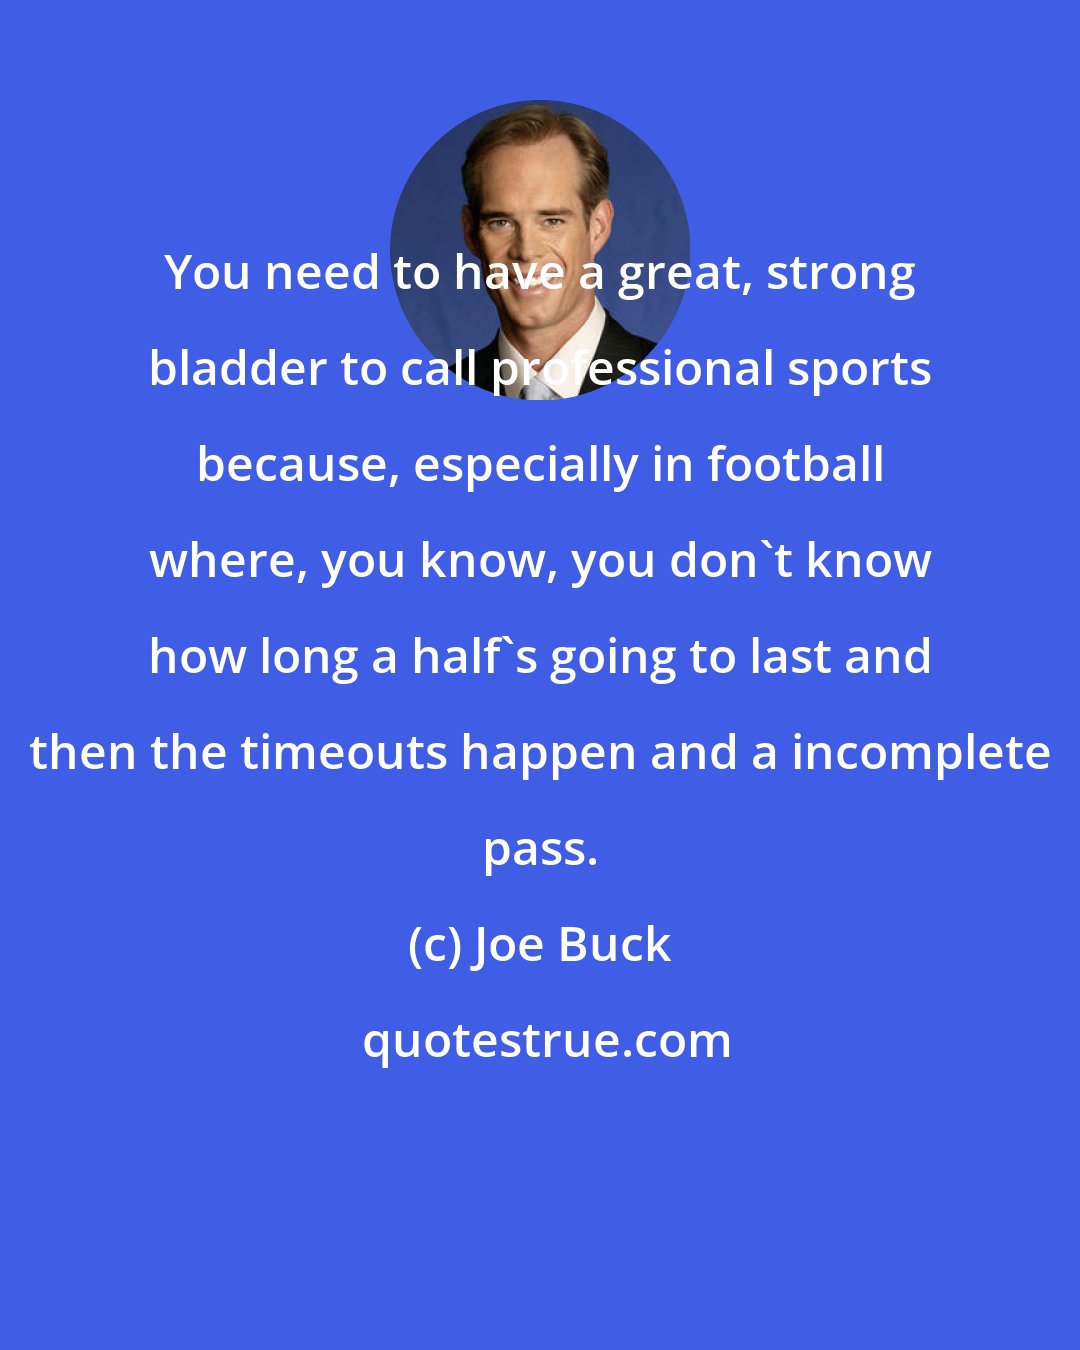 Joe Buck: You need to have a great, strong bladder to call professional sports because, especially in football where, you know, you don't know how long a half's going to last and then the timeouts happen and a incomplete pass.